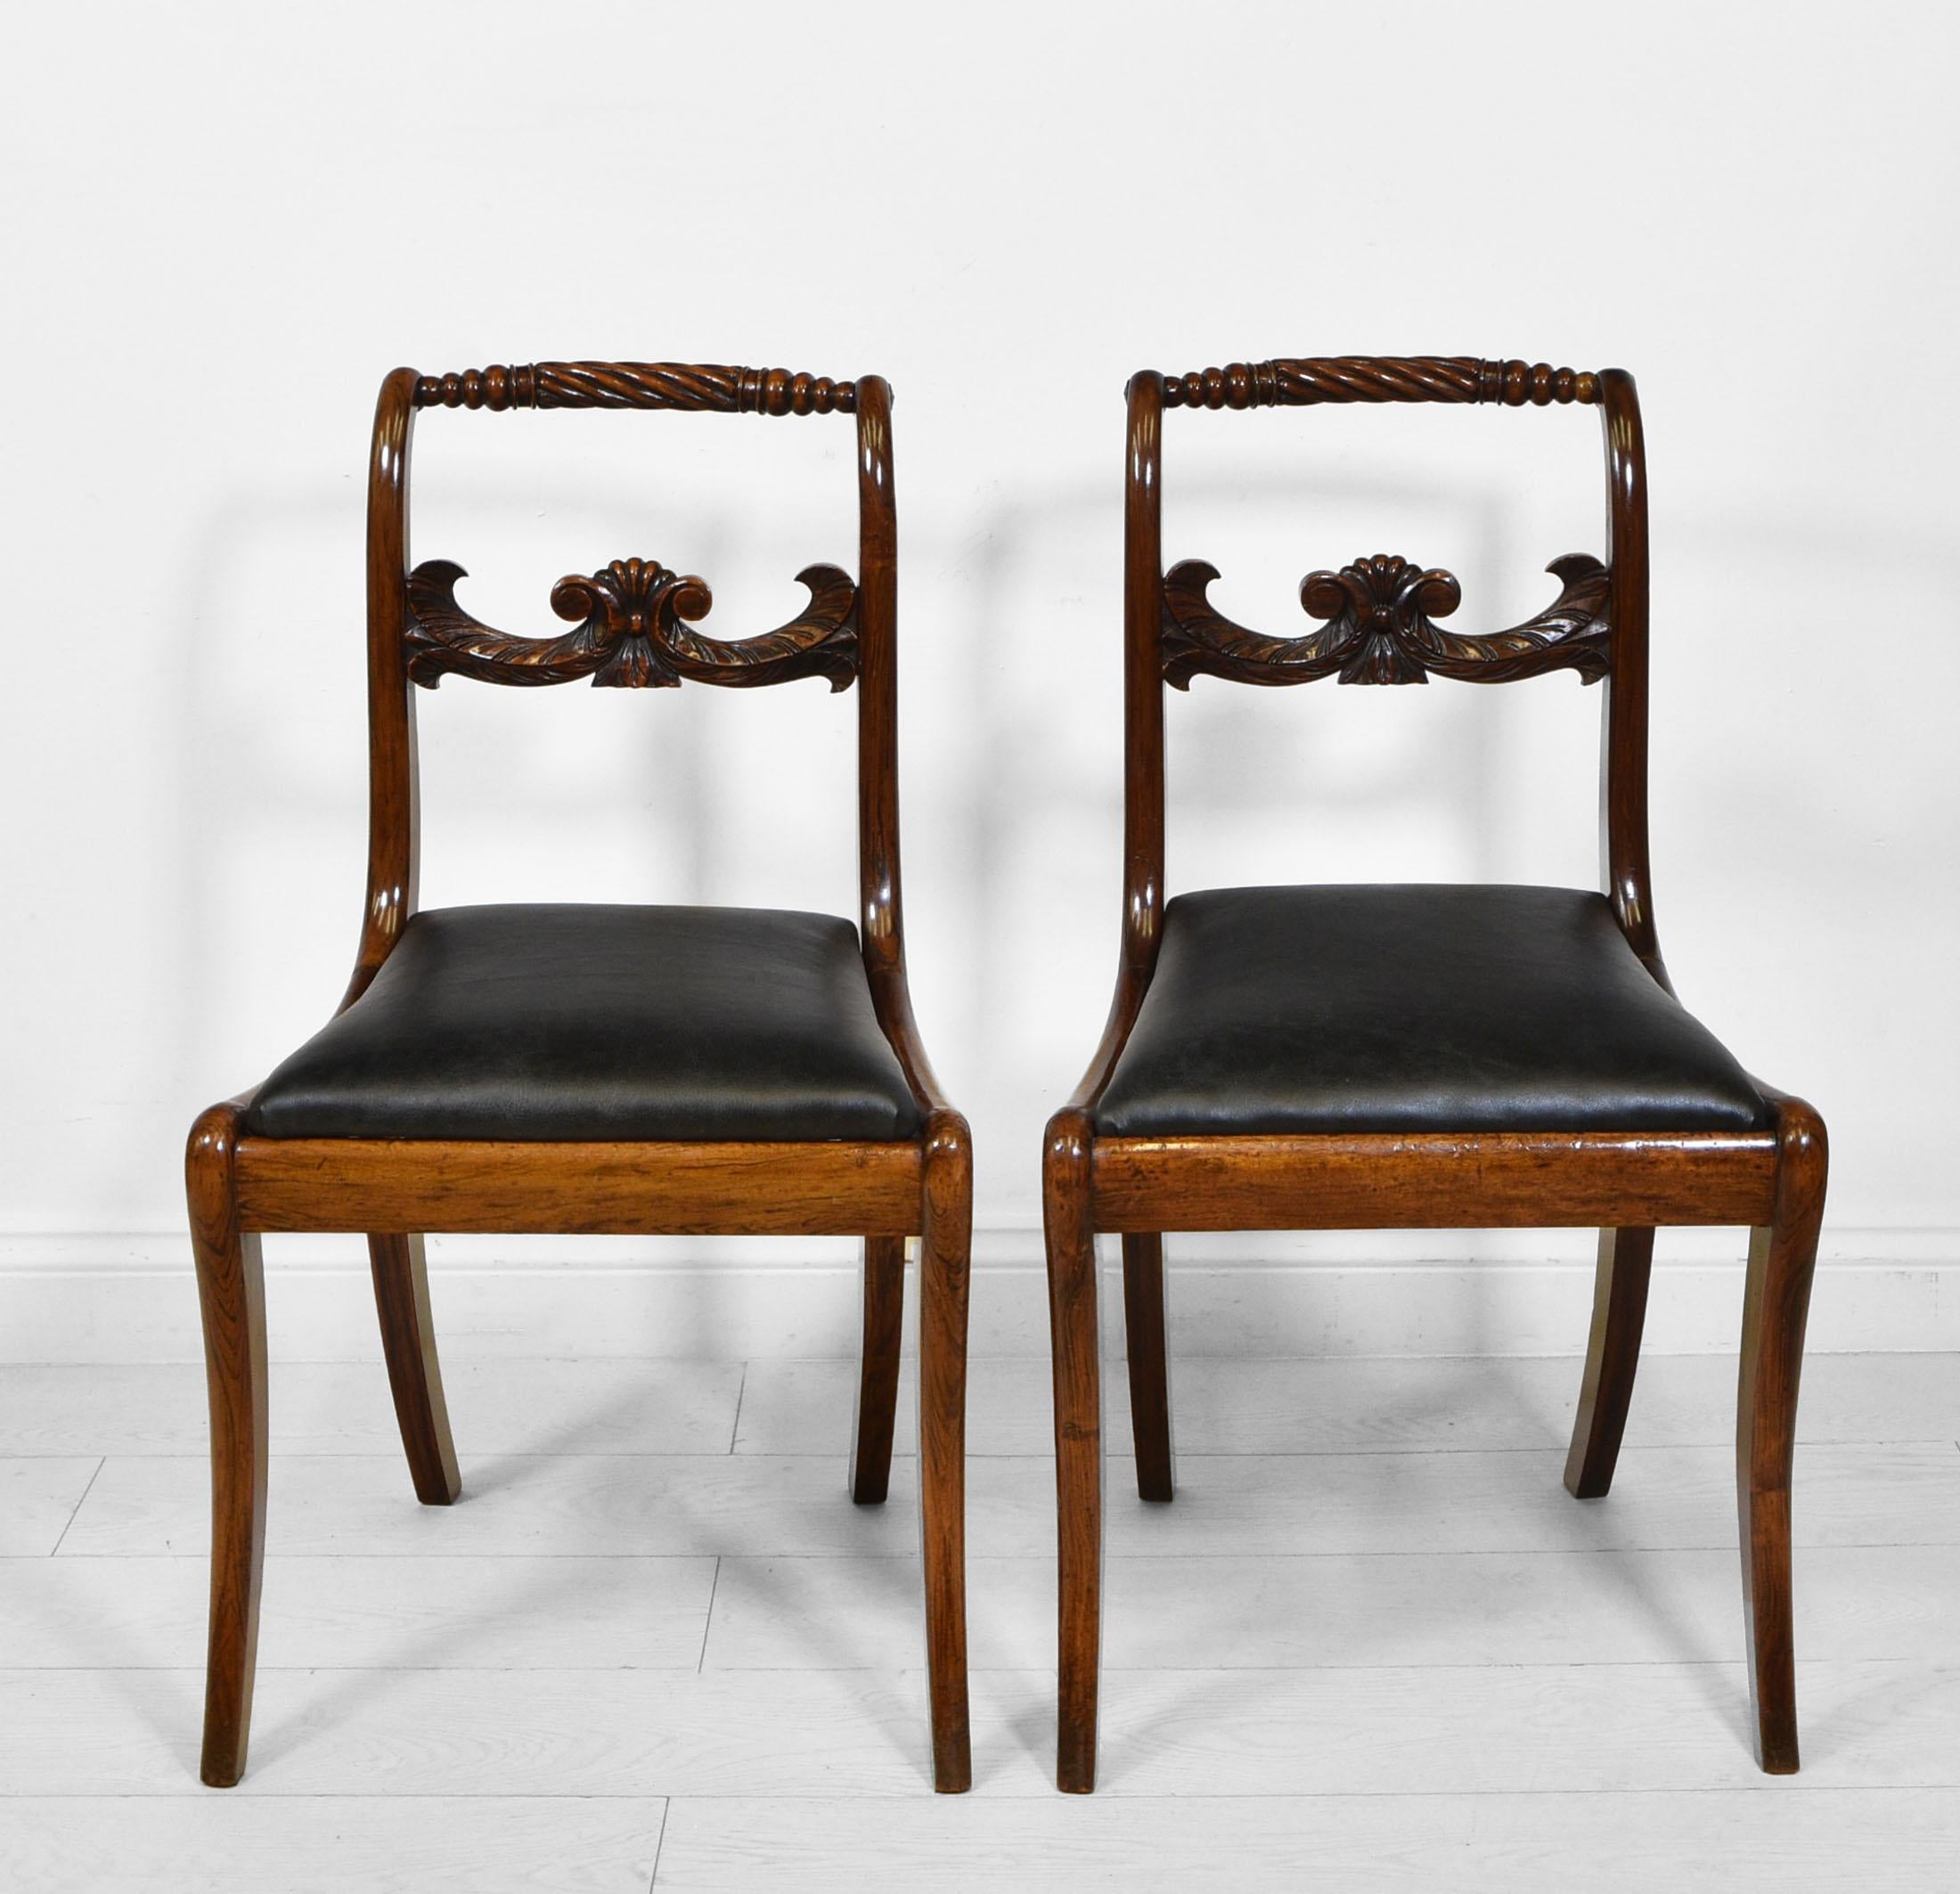 Hand-Carved Pair Regency Simulated Rosewood & Leather Trafalgar Chairs, Circa 1820 For Sale